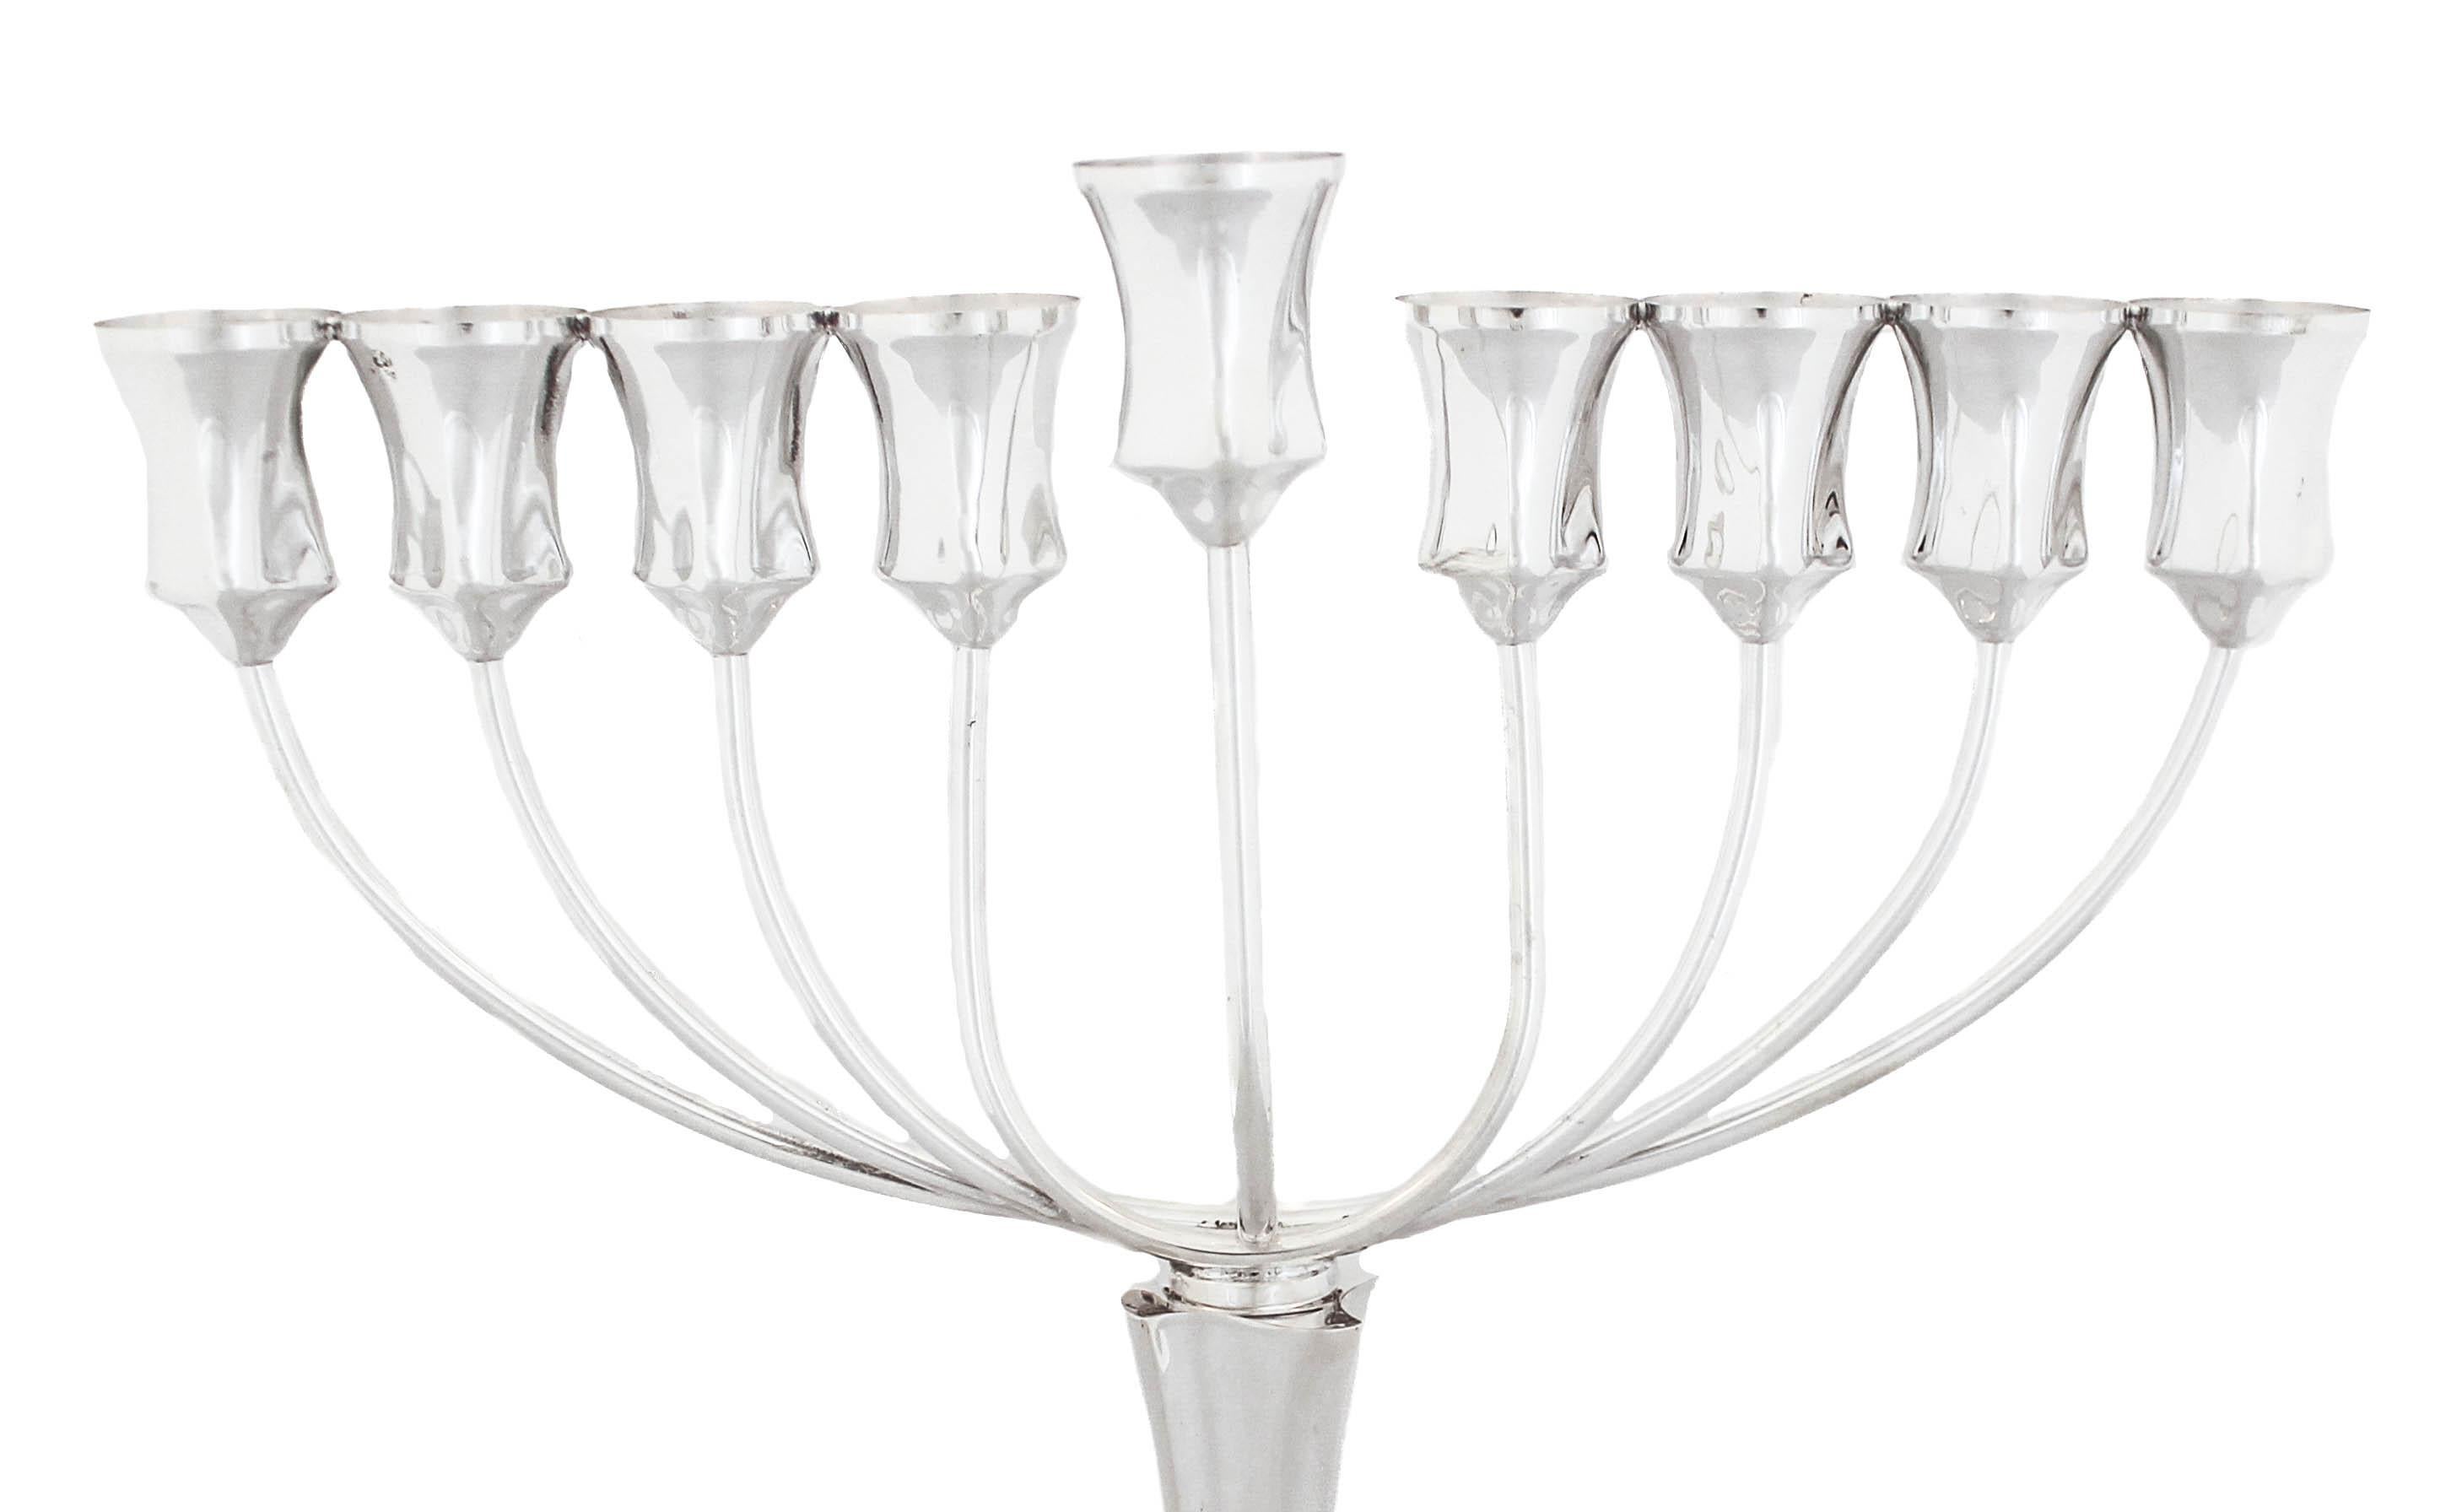 Being offered is a new sterling silver menorah made in Israel.  It has a shiny finish with a swirl base and square shape cups.  It is contemporary and sleek.  The menorah unscrews in the center — where the pedestal meets the top for easy storage.  A